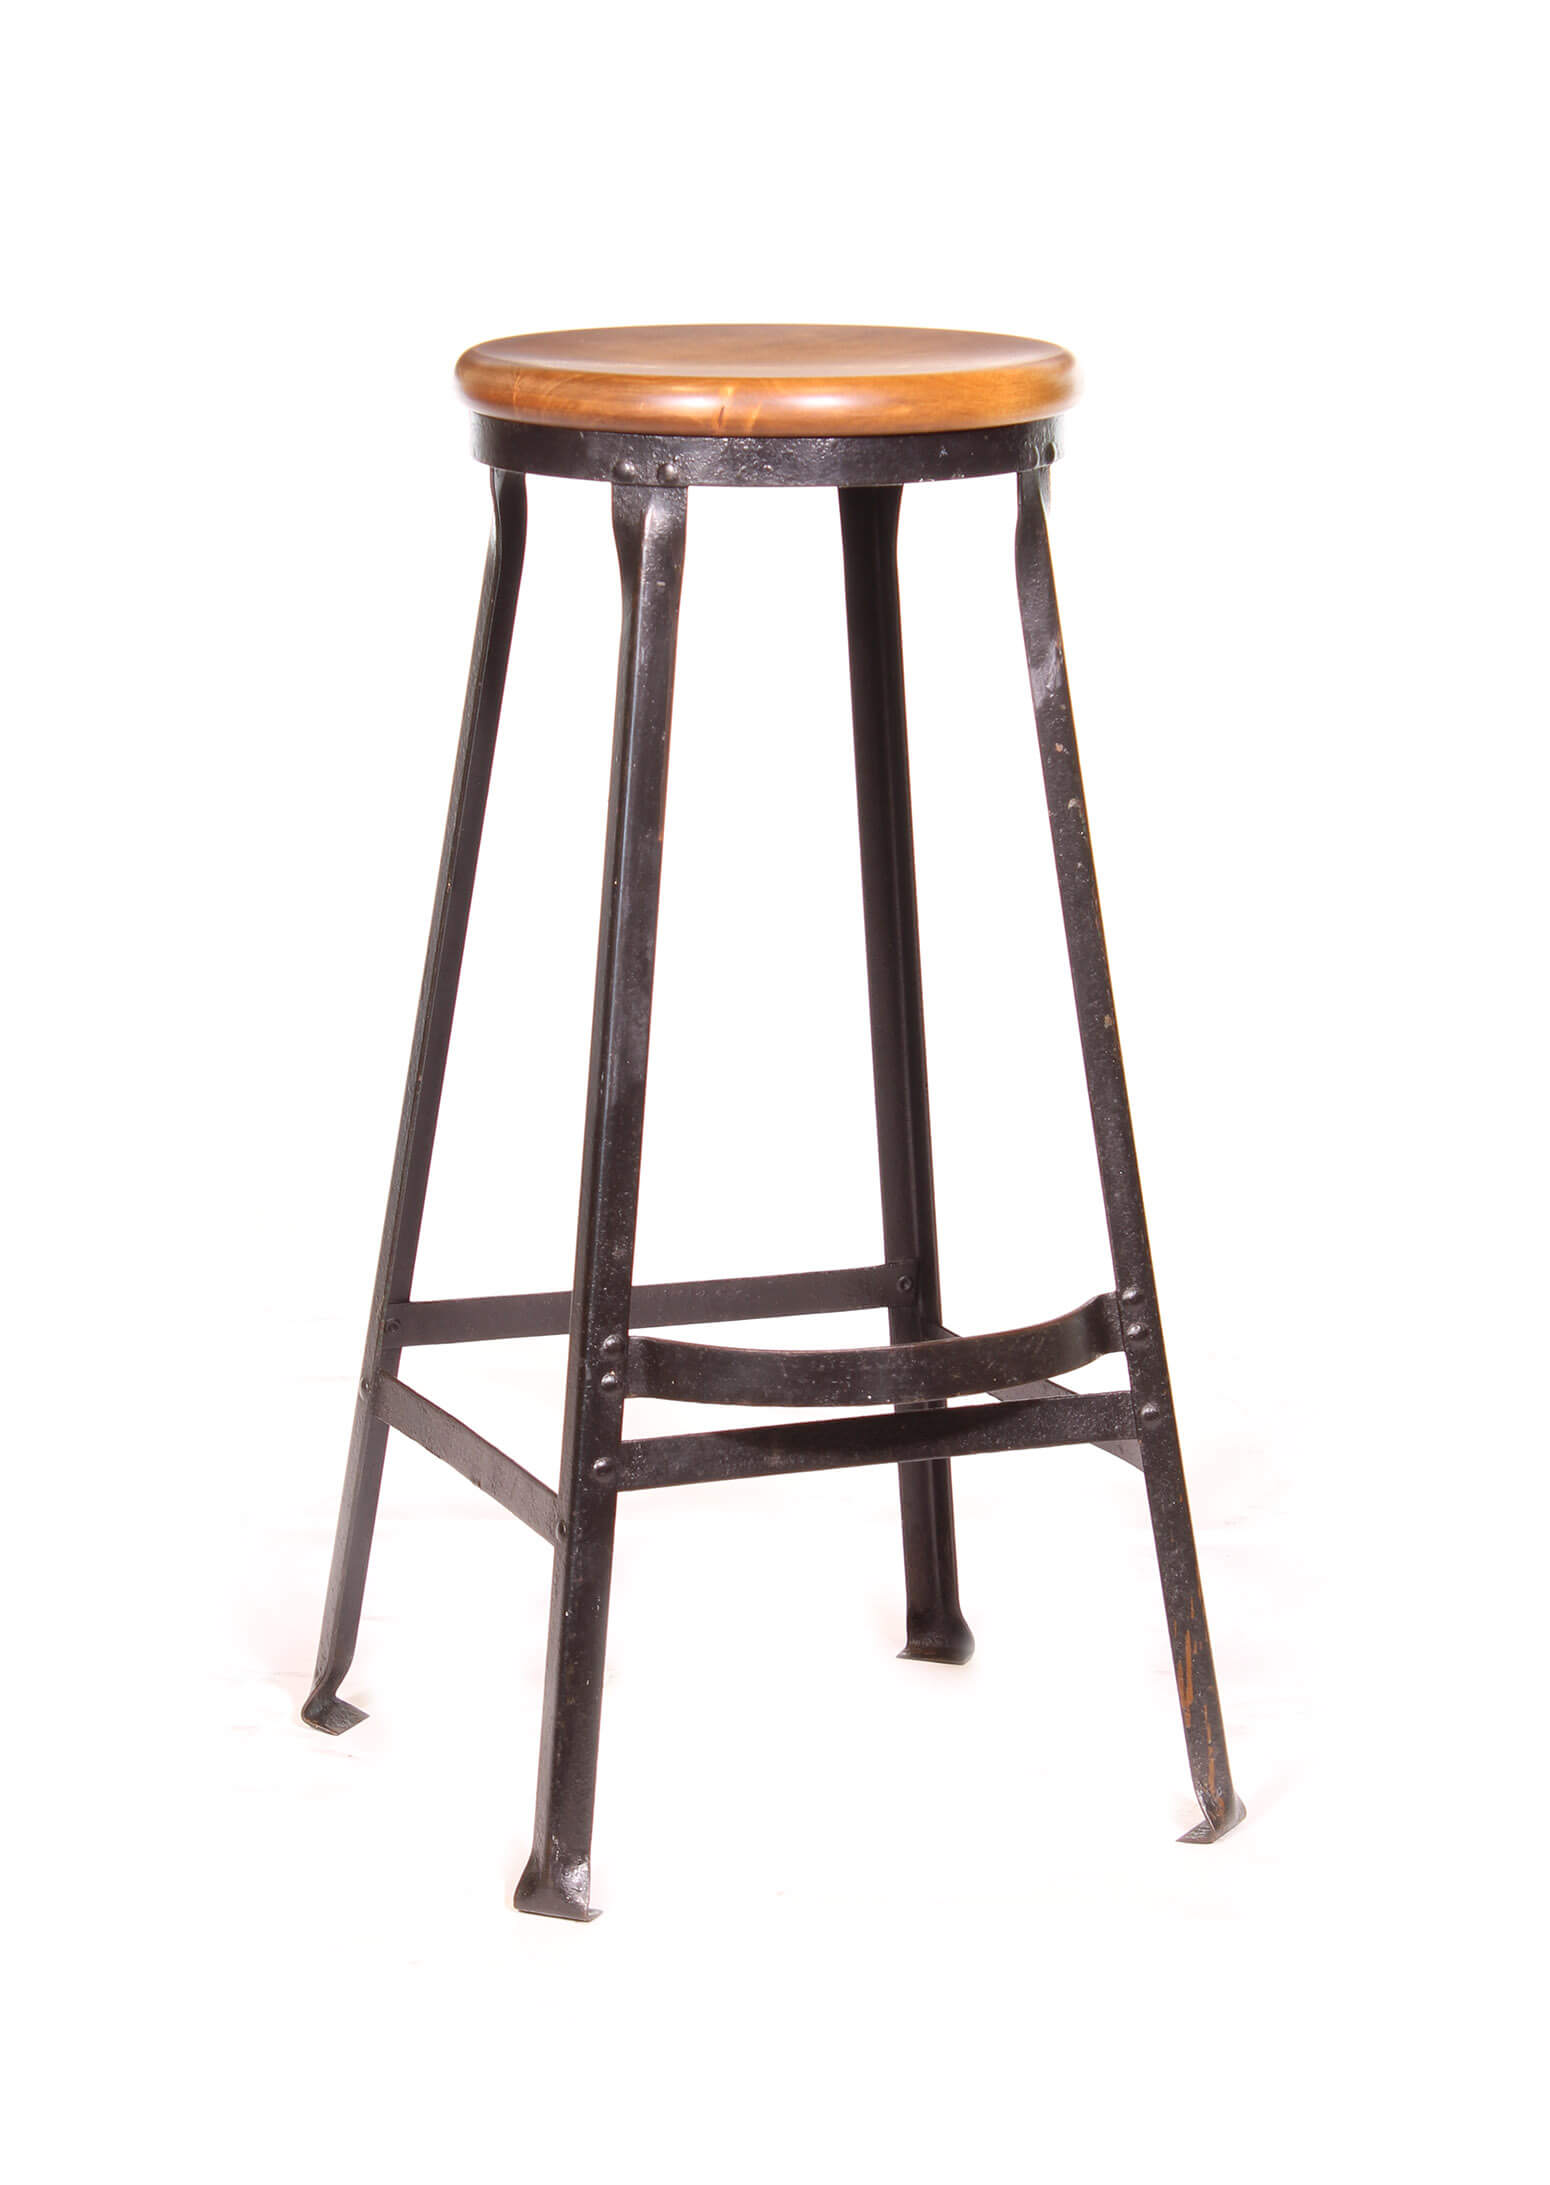 Factory Shop Stool - Vintage Industrial by Get Back, Inc